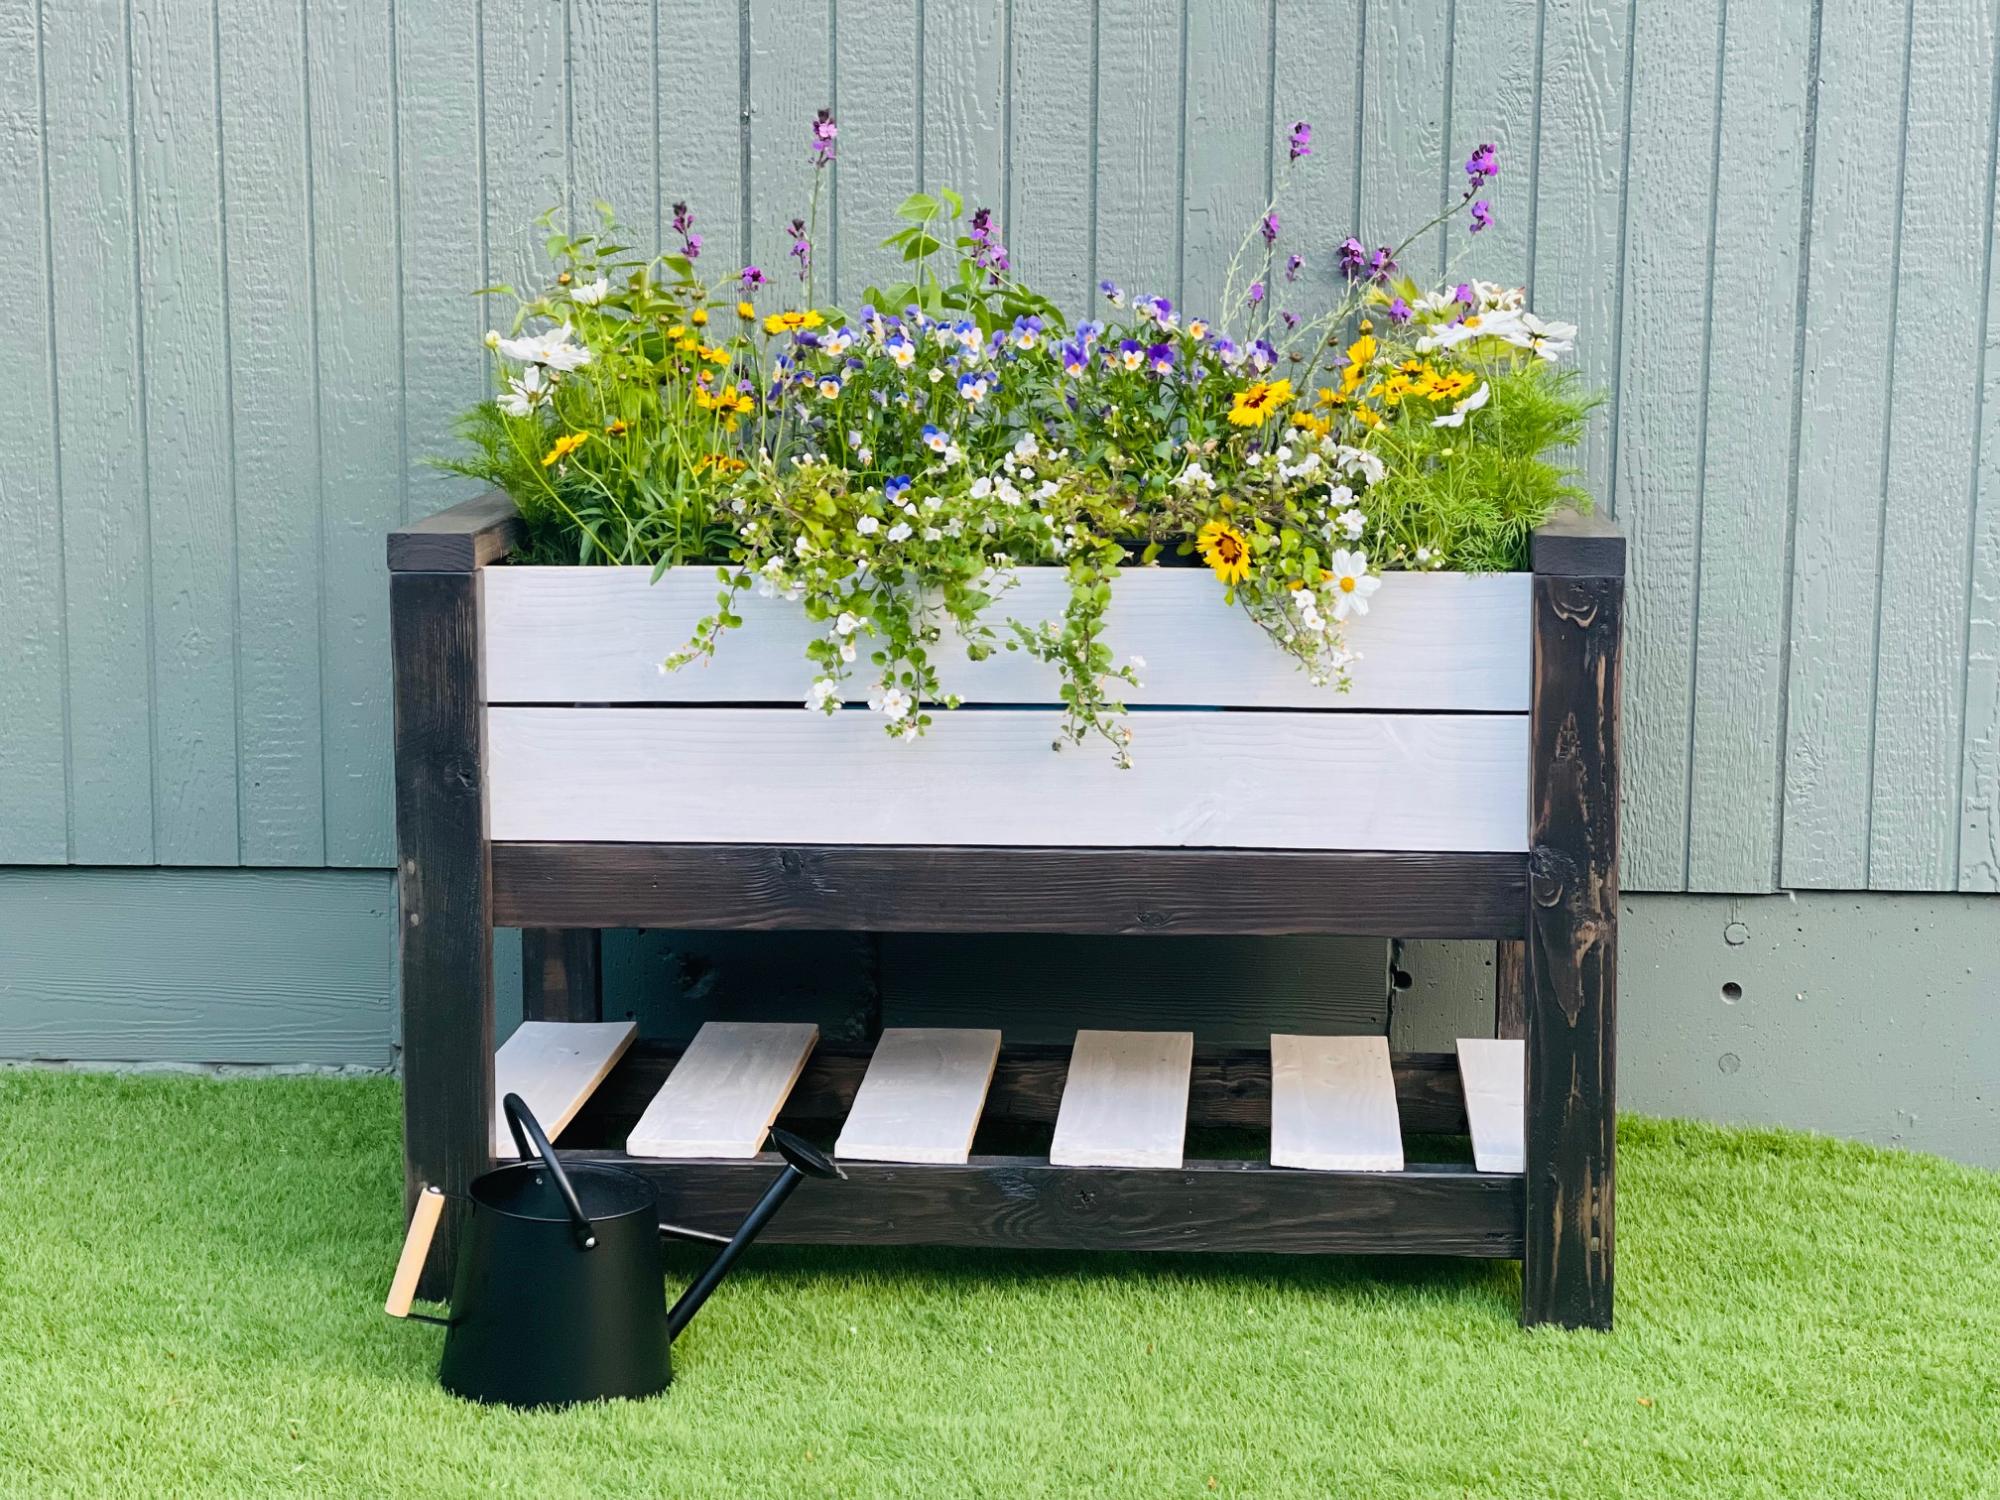 Image of Simple wooden raised planter box with white picket fence